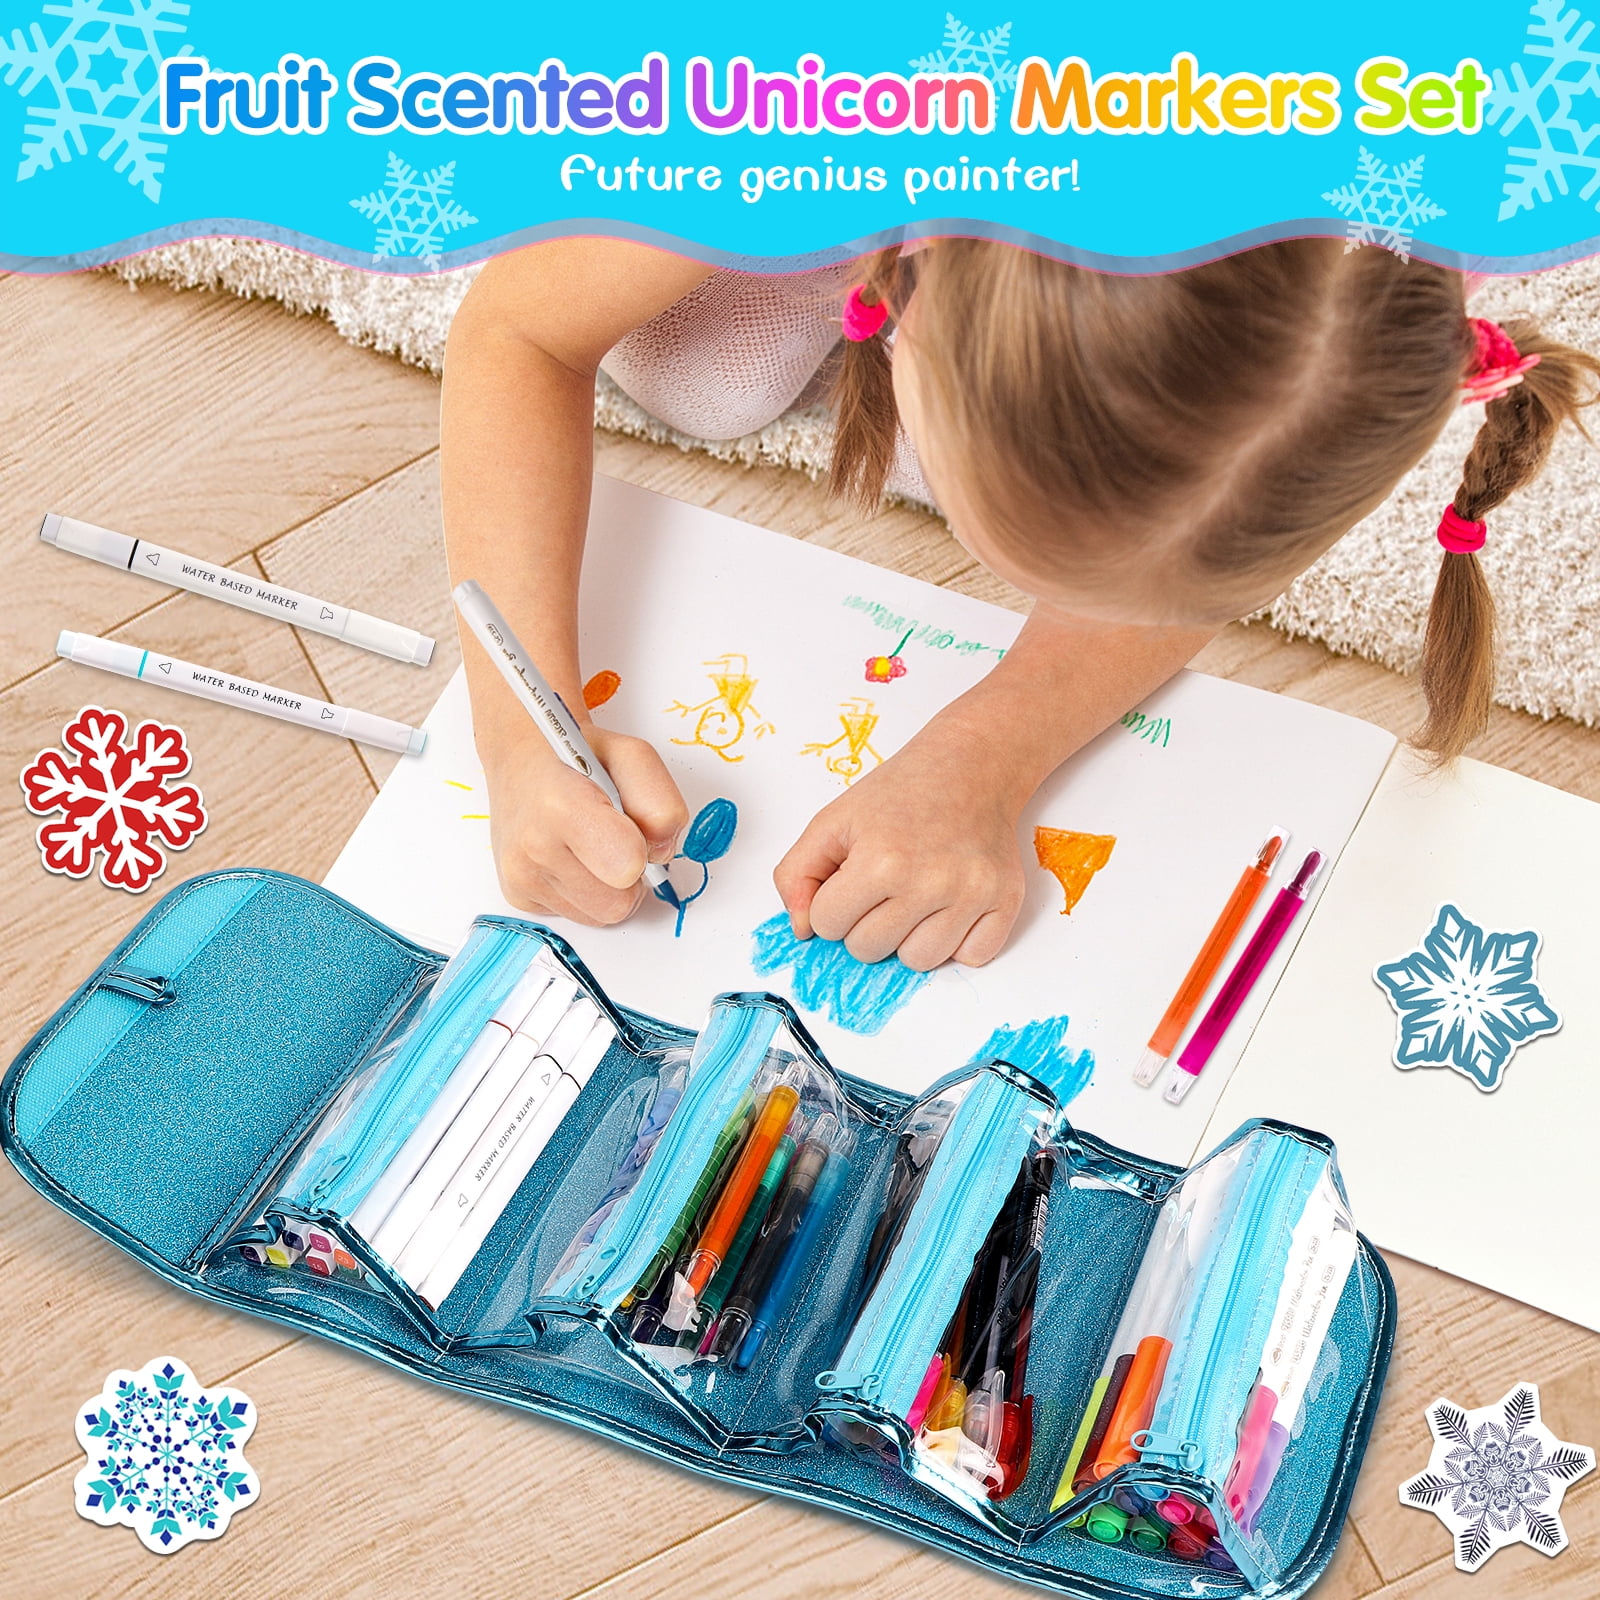  Fruit Scented Markers Set 57Pcs with Glitter Dinosaur Pencil  Case & Stationery, Art Supplies for Kids Ages 4-6-8, Art Coloring Kits  Box,Gifts Toy for Boys Age 5,7,Gel Pen,Pencil&Crayon Drawing Stuff 